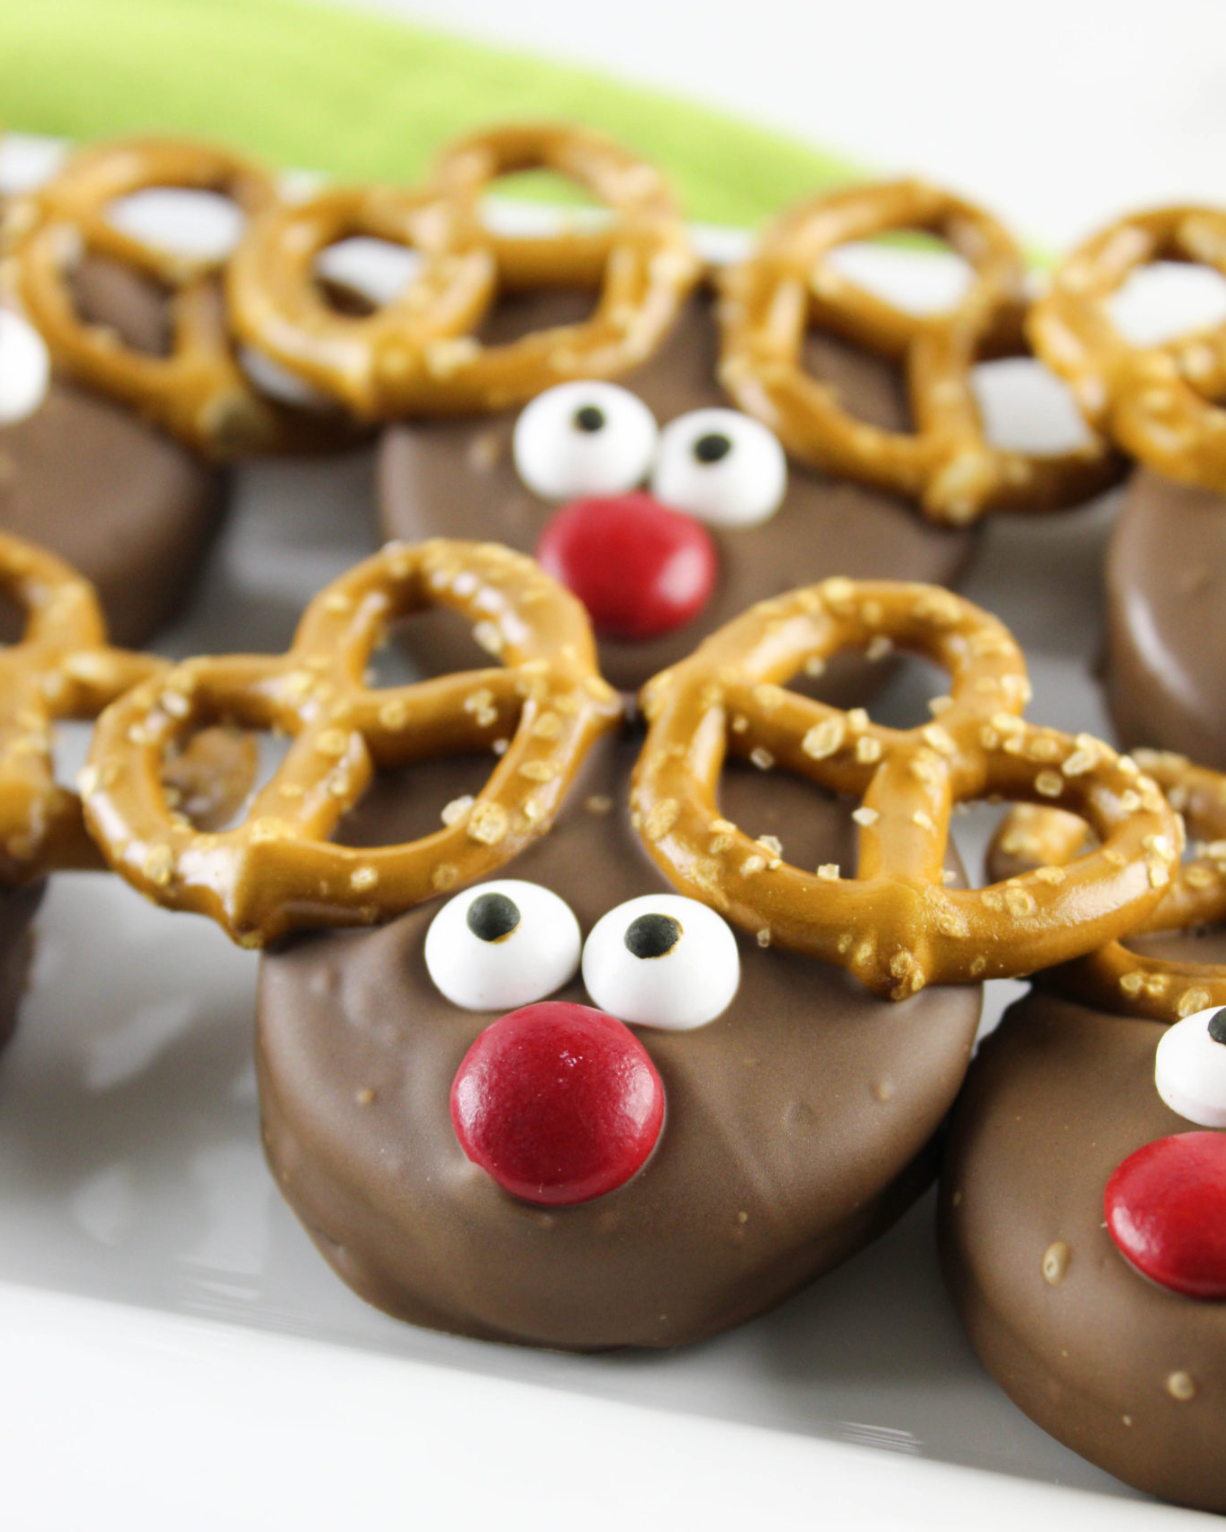 Chocolate covered Oreos made to look like reindeers (with pretzels for antlers and red m&m noses)